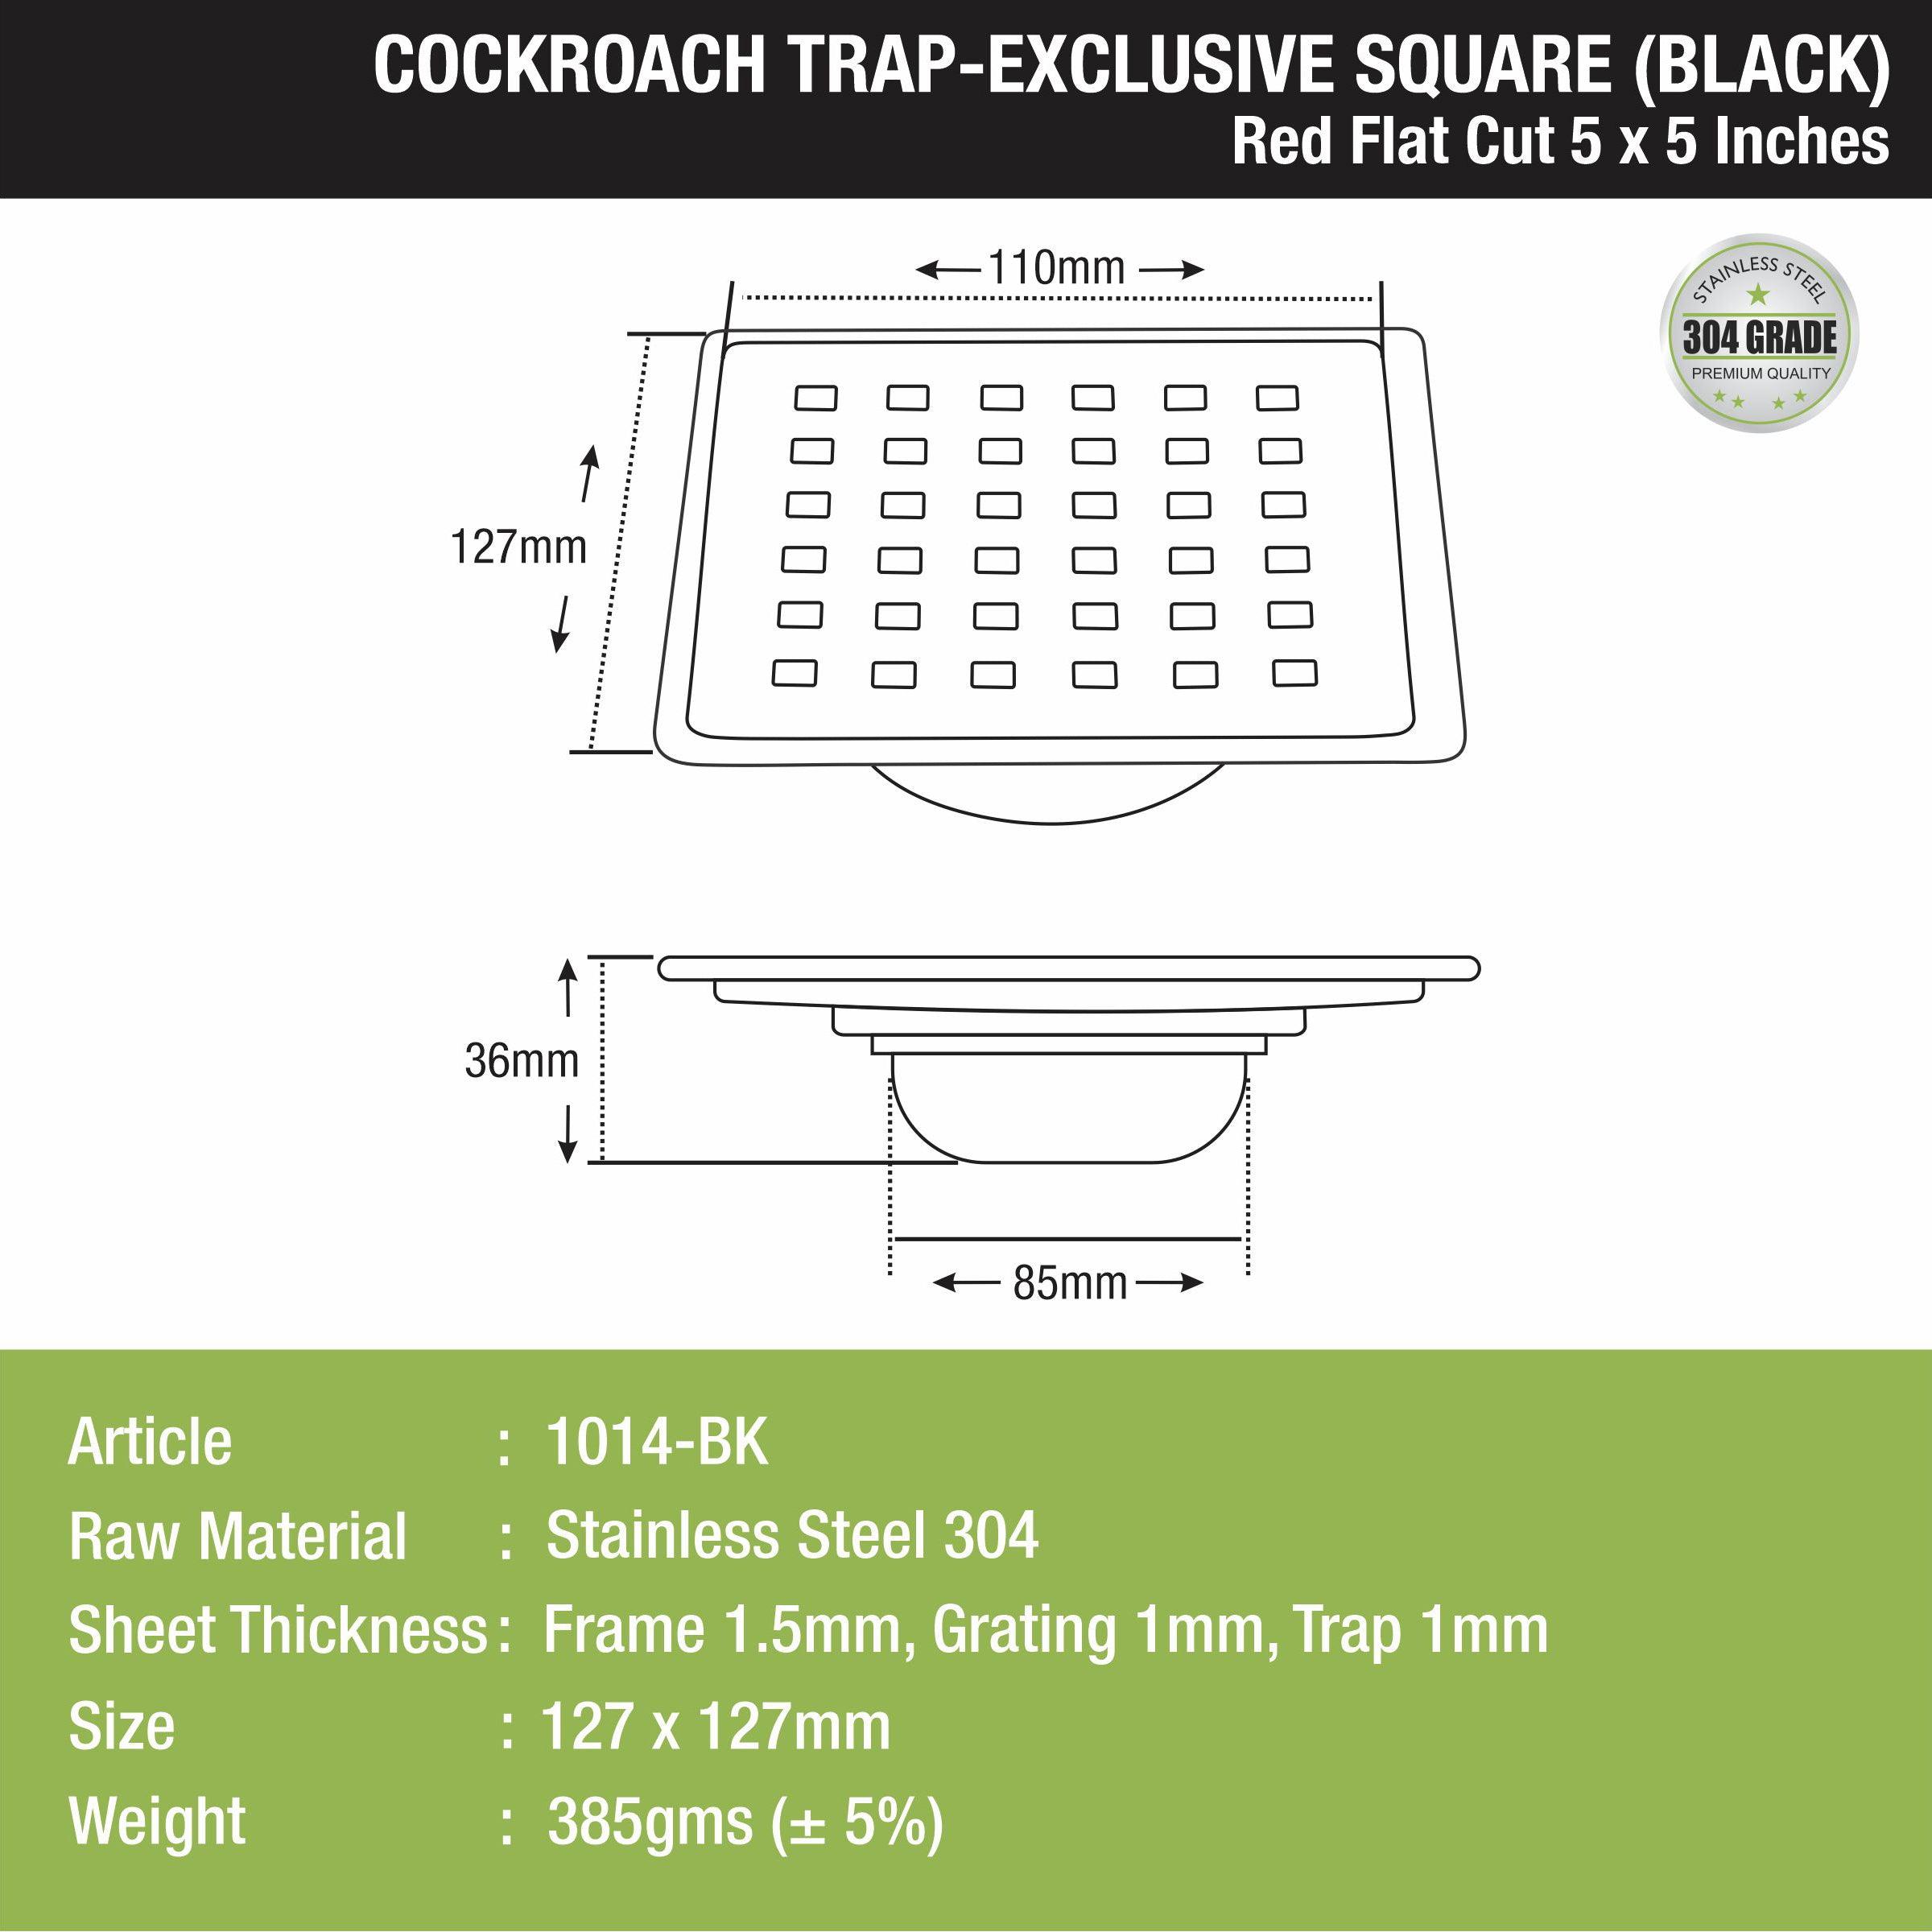 Red Exclusive Square Flat Cut Floor Drain in Black PVD Coating (5 x 5 Inches) with Cockroach Trap size and measurement 